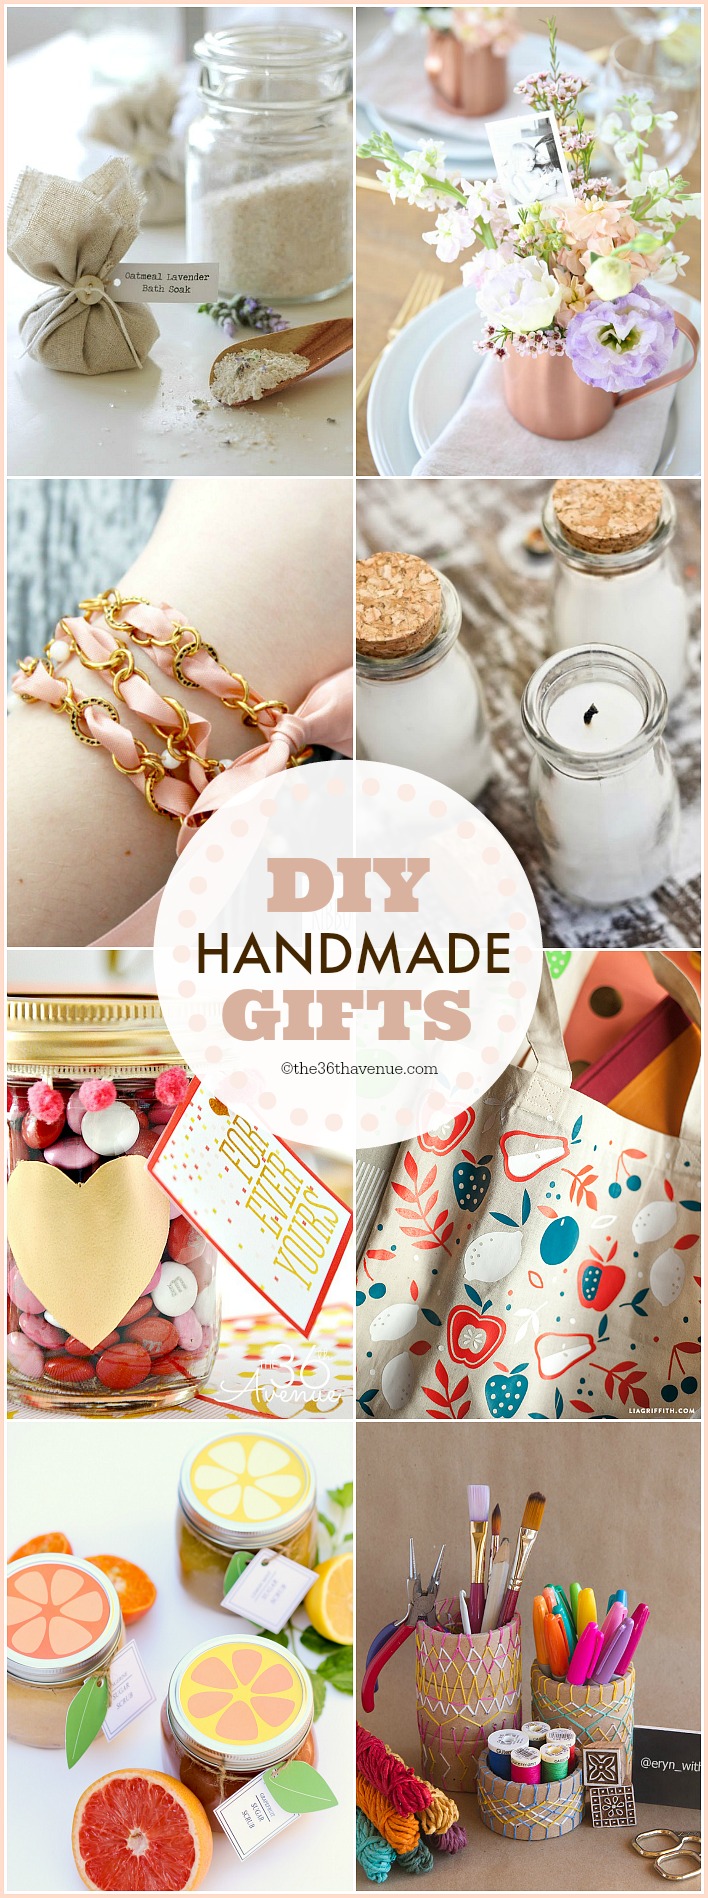 25 Handmade Gifts that are perfect for Christmas gifts, birthday presents, and Mother's Day Gifts... These handmade gift ideas under five dollars are super easy to make, adorable, and affordable... MUST RE-PIN!